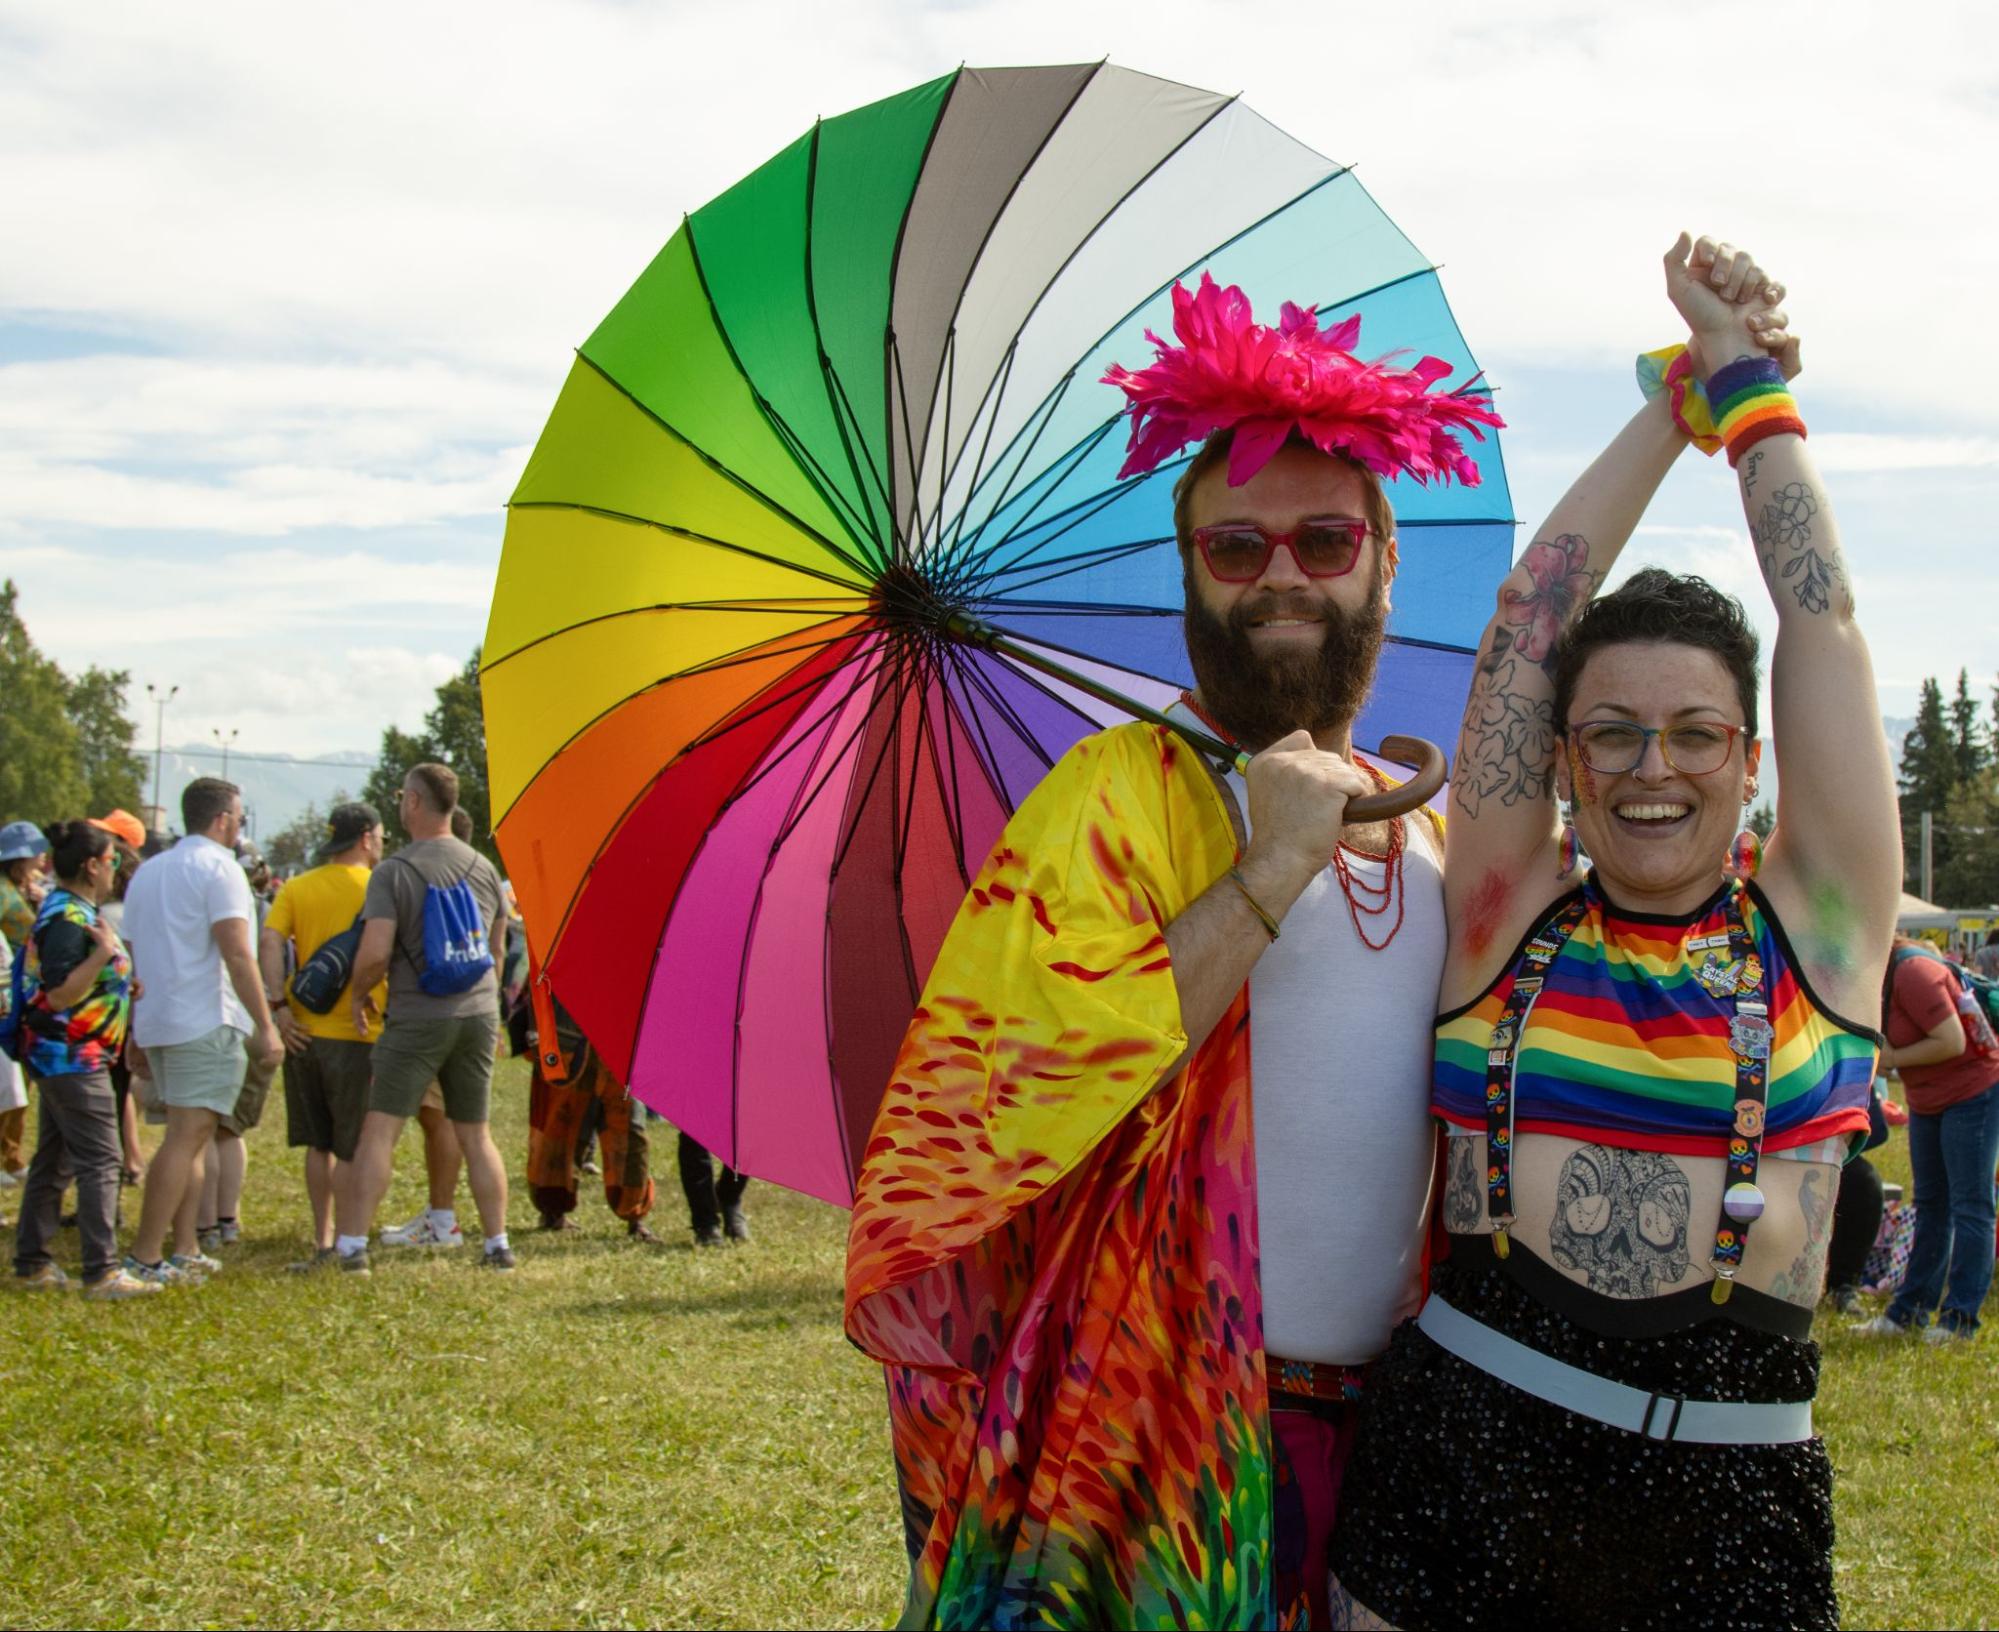 Two adults wearing rainbow clothing and one holding an umbrella smile in a photo.